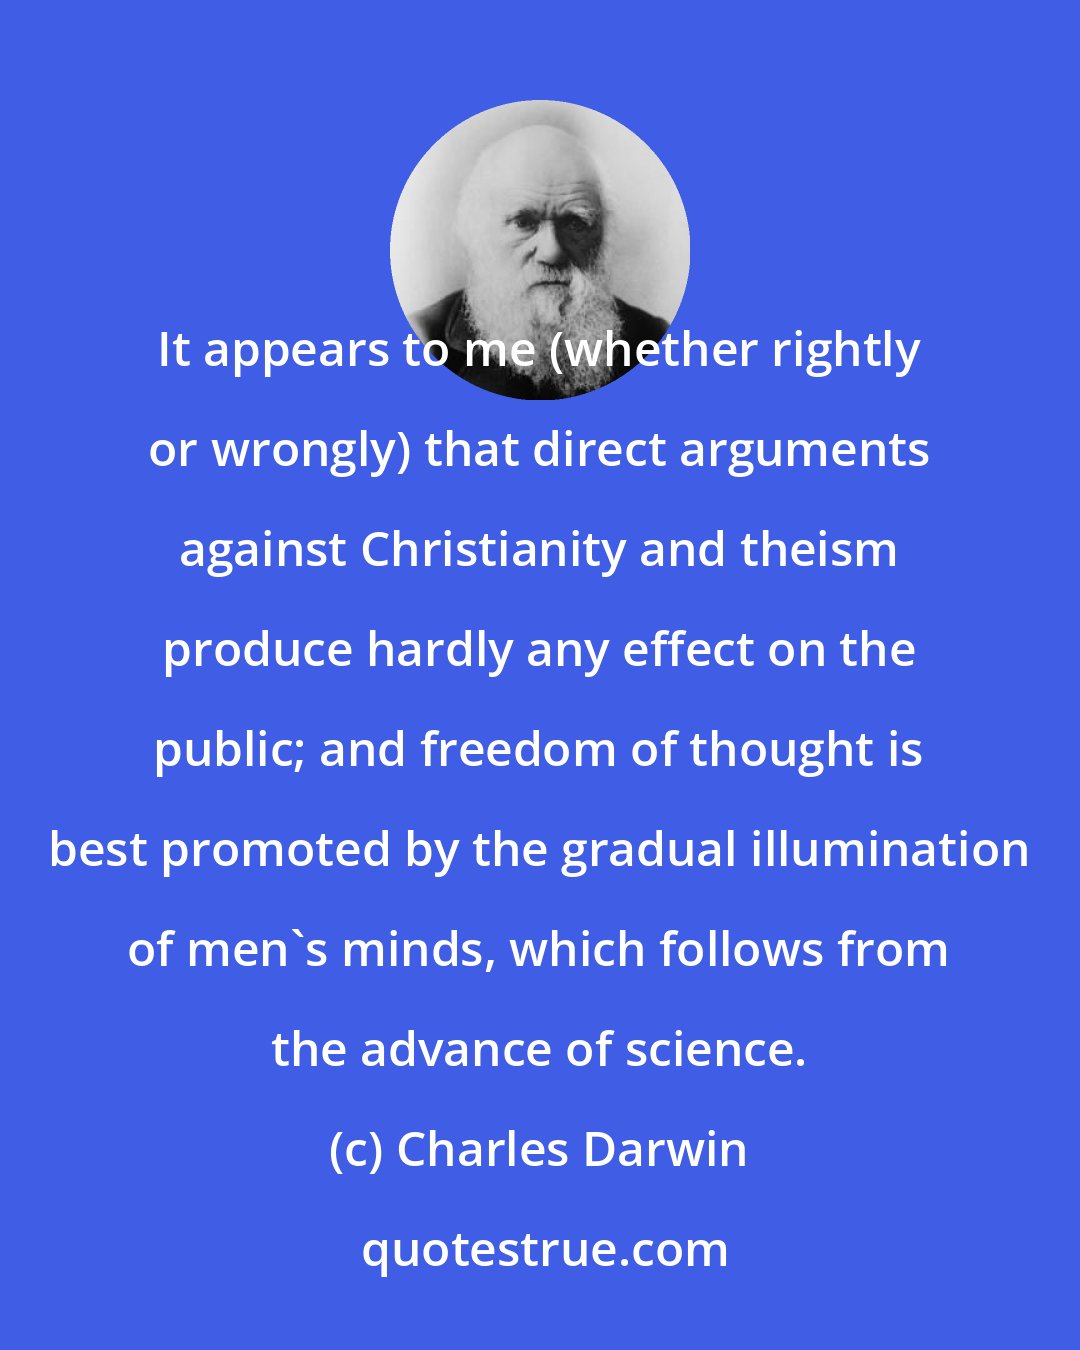 Charles Darwin: It appears to me (whether rightly or wrongly) that direct arguments against Christianity and theism produce hardly any effect on the public; and freedom of thought is best promoted by the gradual illumination of men's minds, which follows from the advance of science.